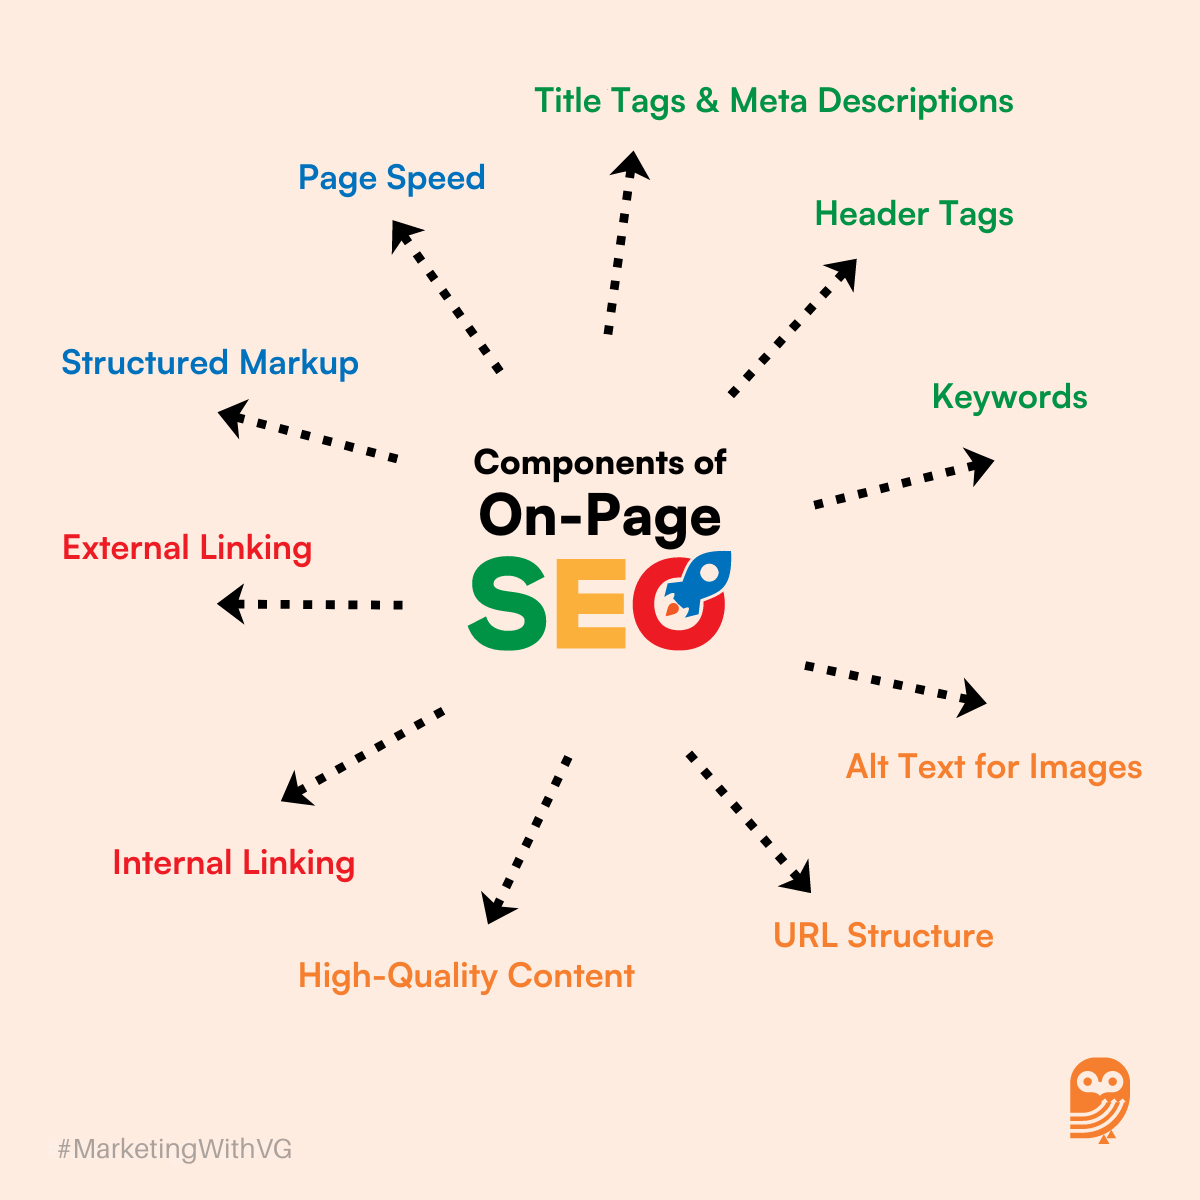 Components of On-Page SEO